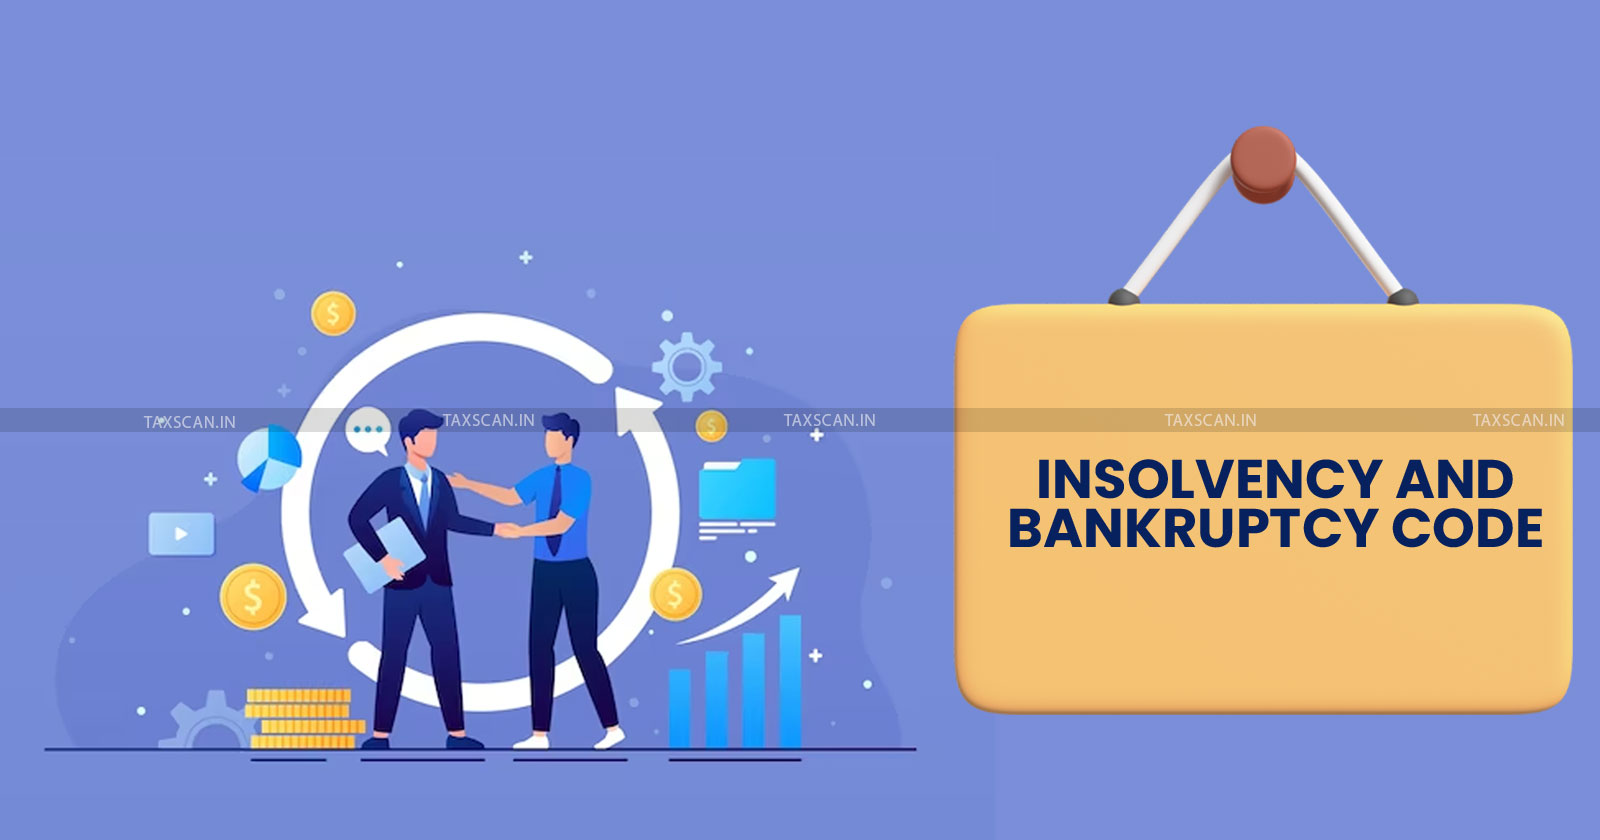 Insolvency and Bankruptcy Code - CIRP - IBC Case analysis - IBC - TAXSCAN